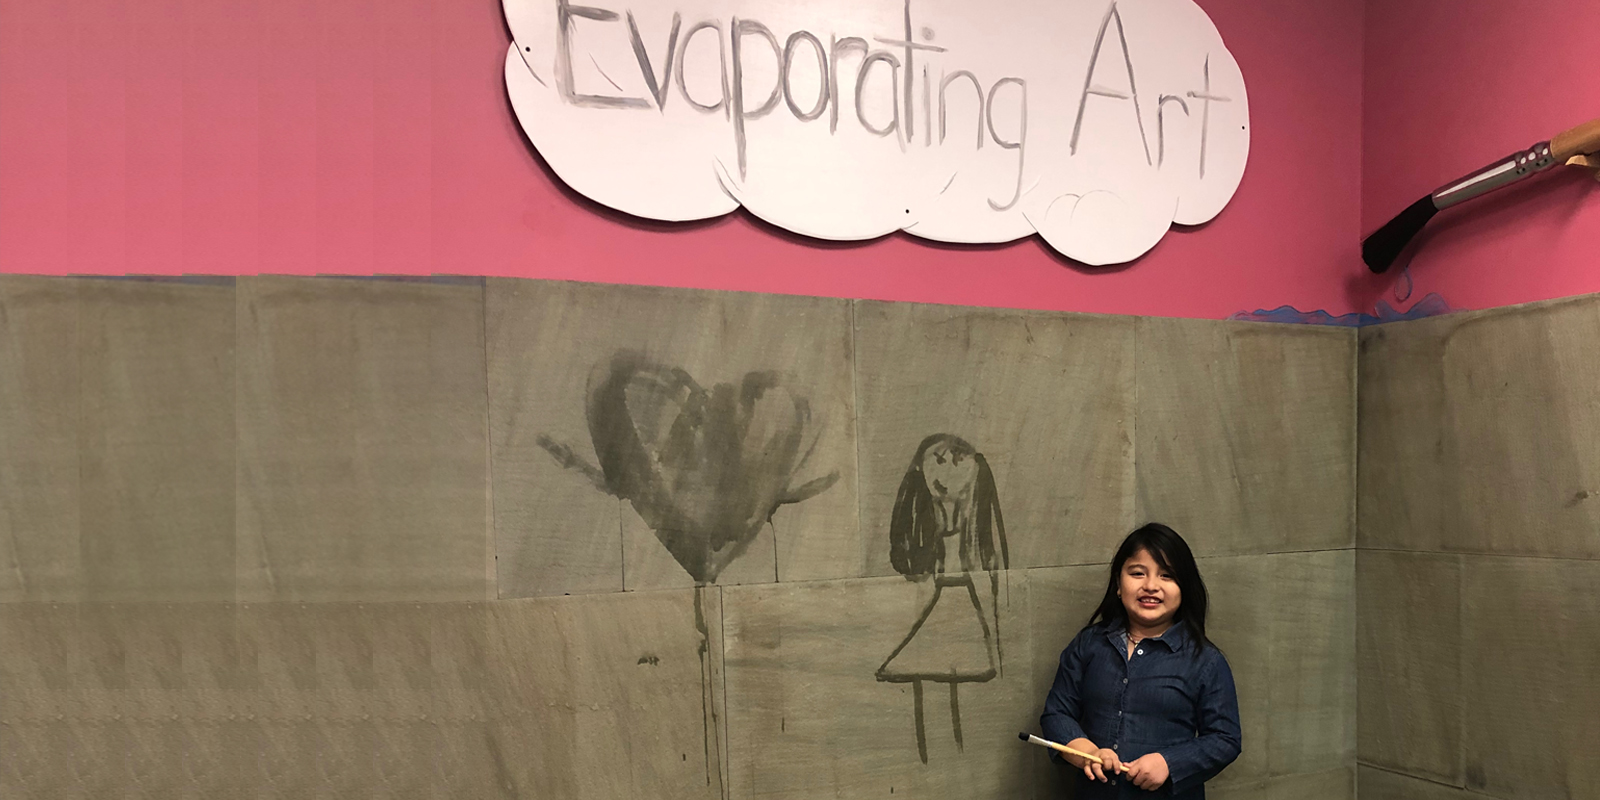 Young girl with dark hair and denim dress holding paintbrush below sign that says Evaporating Art